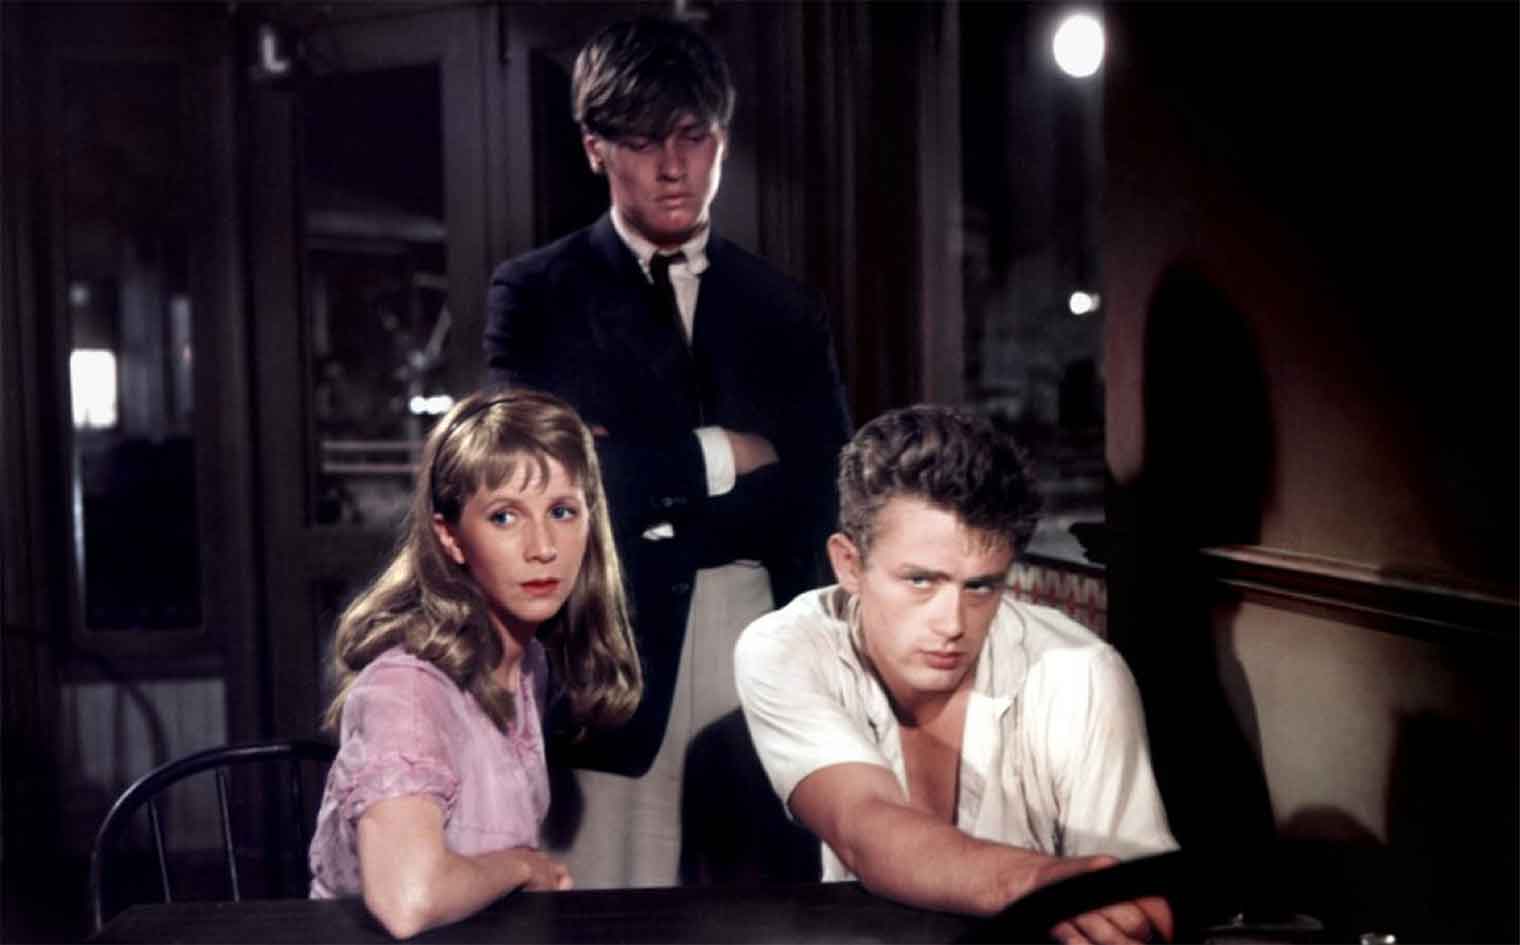 Cal Trask (James Dean) and Abra Bacon (Julie Harris) sit at a table as Aron Trask (Richard Davalos) angrily looks over in East of Eden